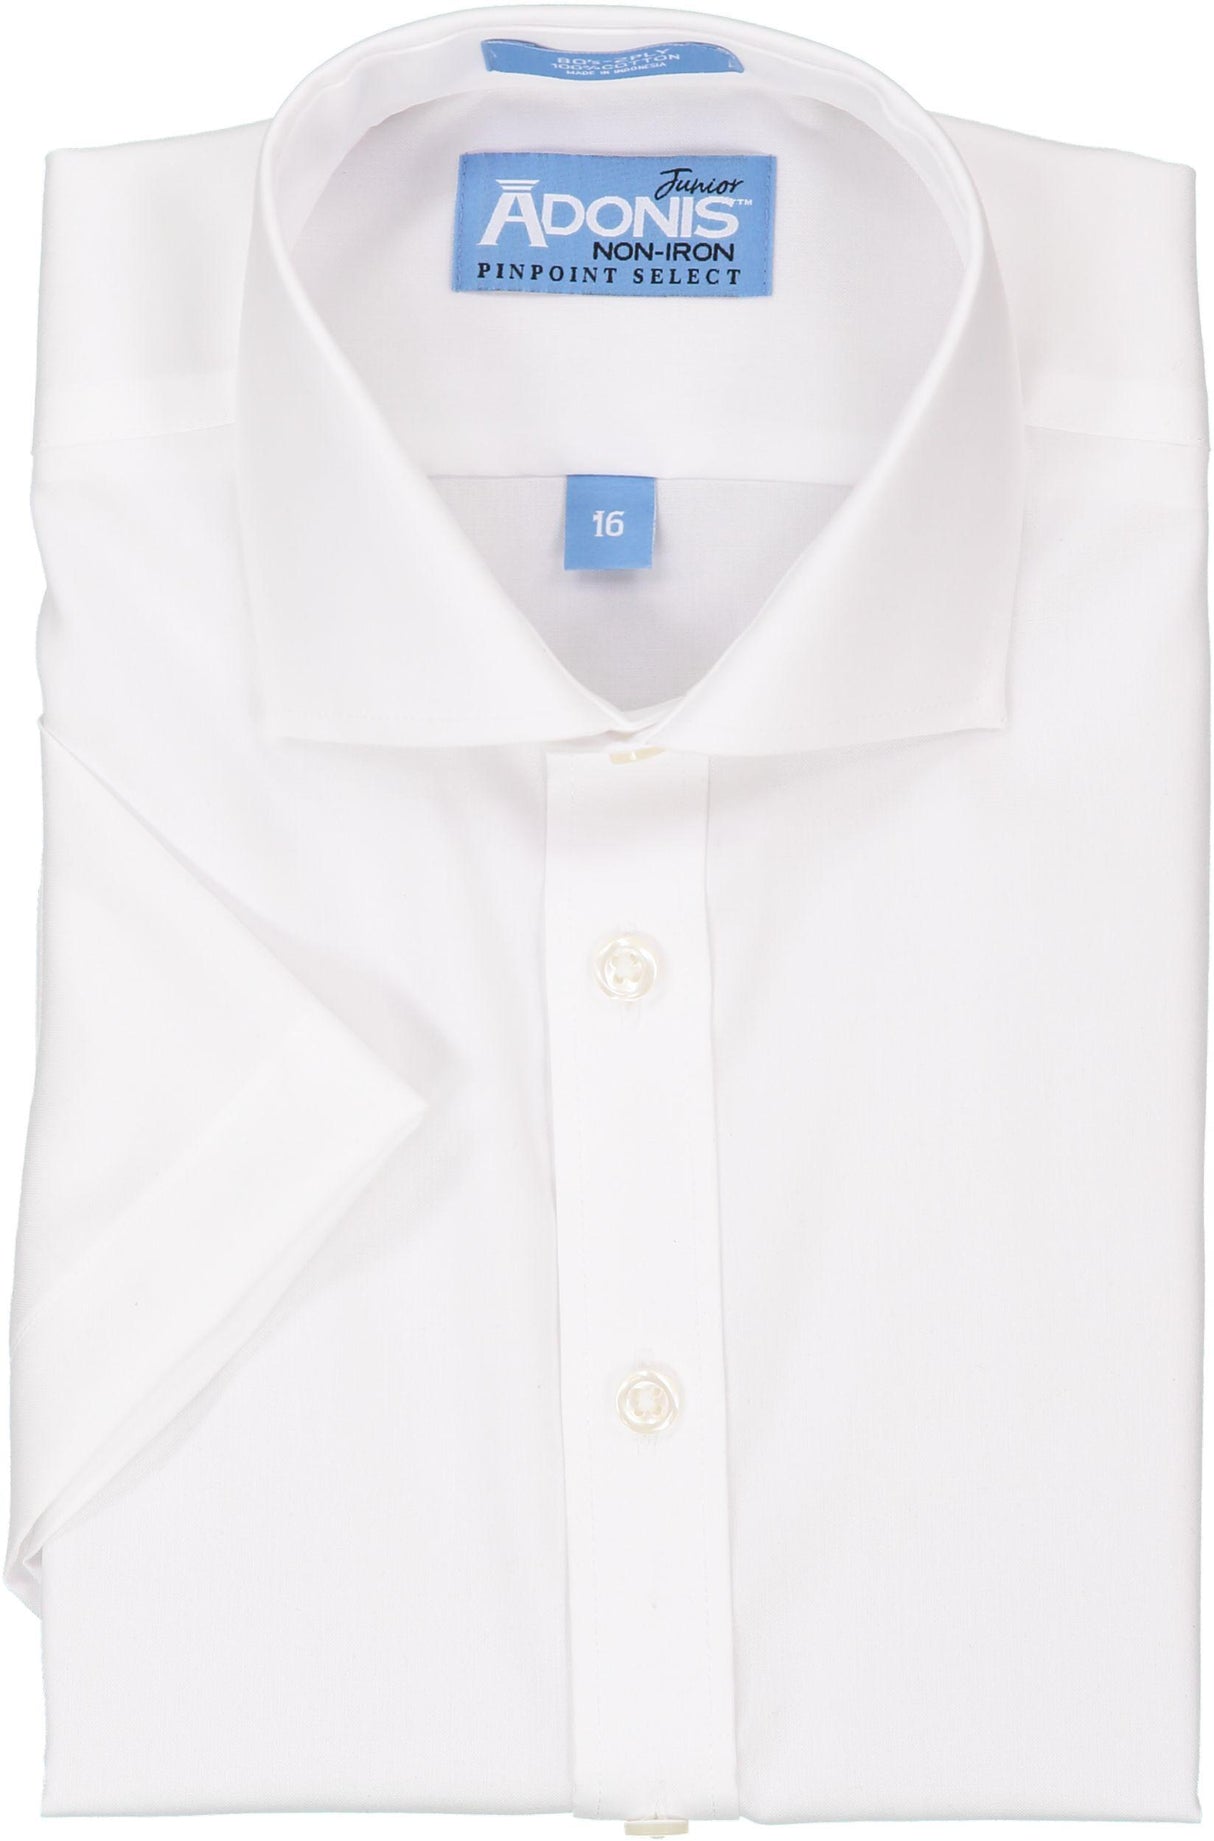 Adonis Boys 100% Cotton Non Iron Solid White Pinpoint Short Sleeve Dress Shirt